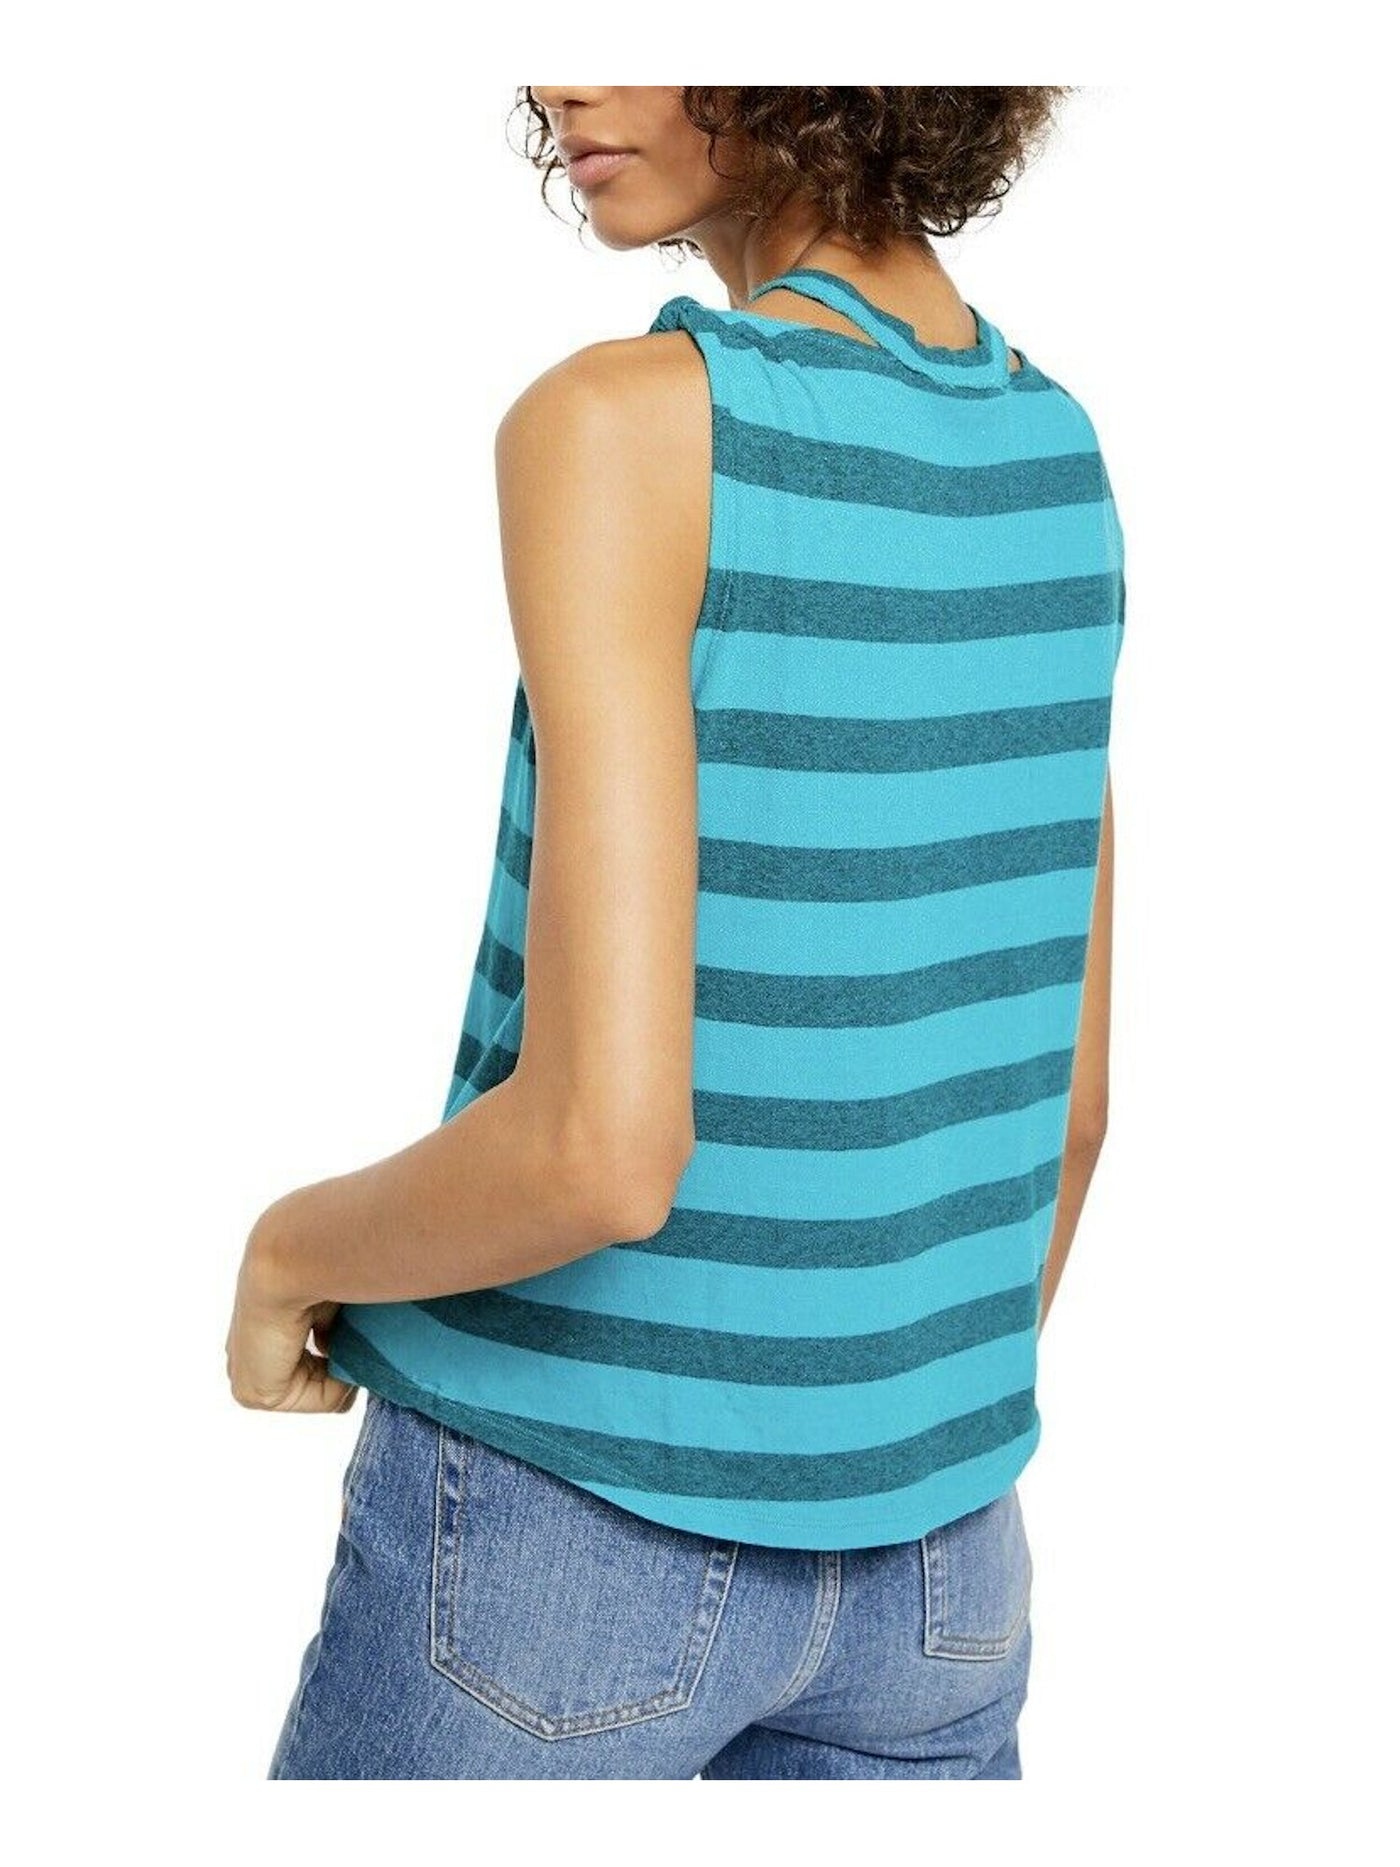 FREE PEOPLE Womens Teal Twist Sleeves Striped Sleeveless Crew Neck Top M